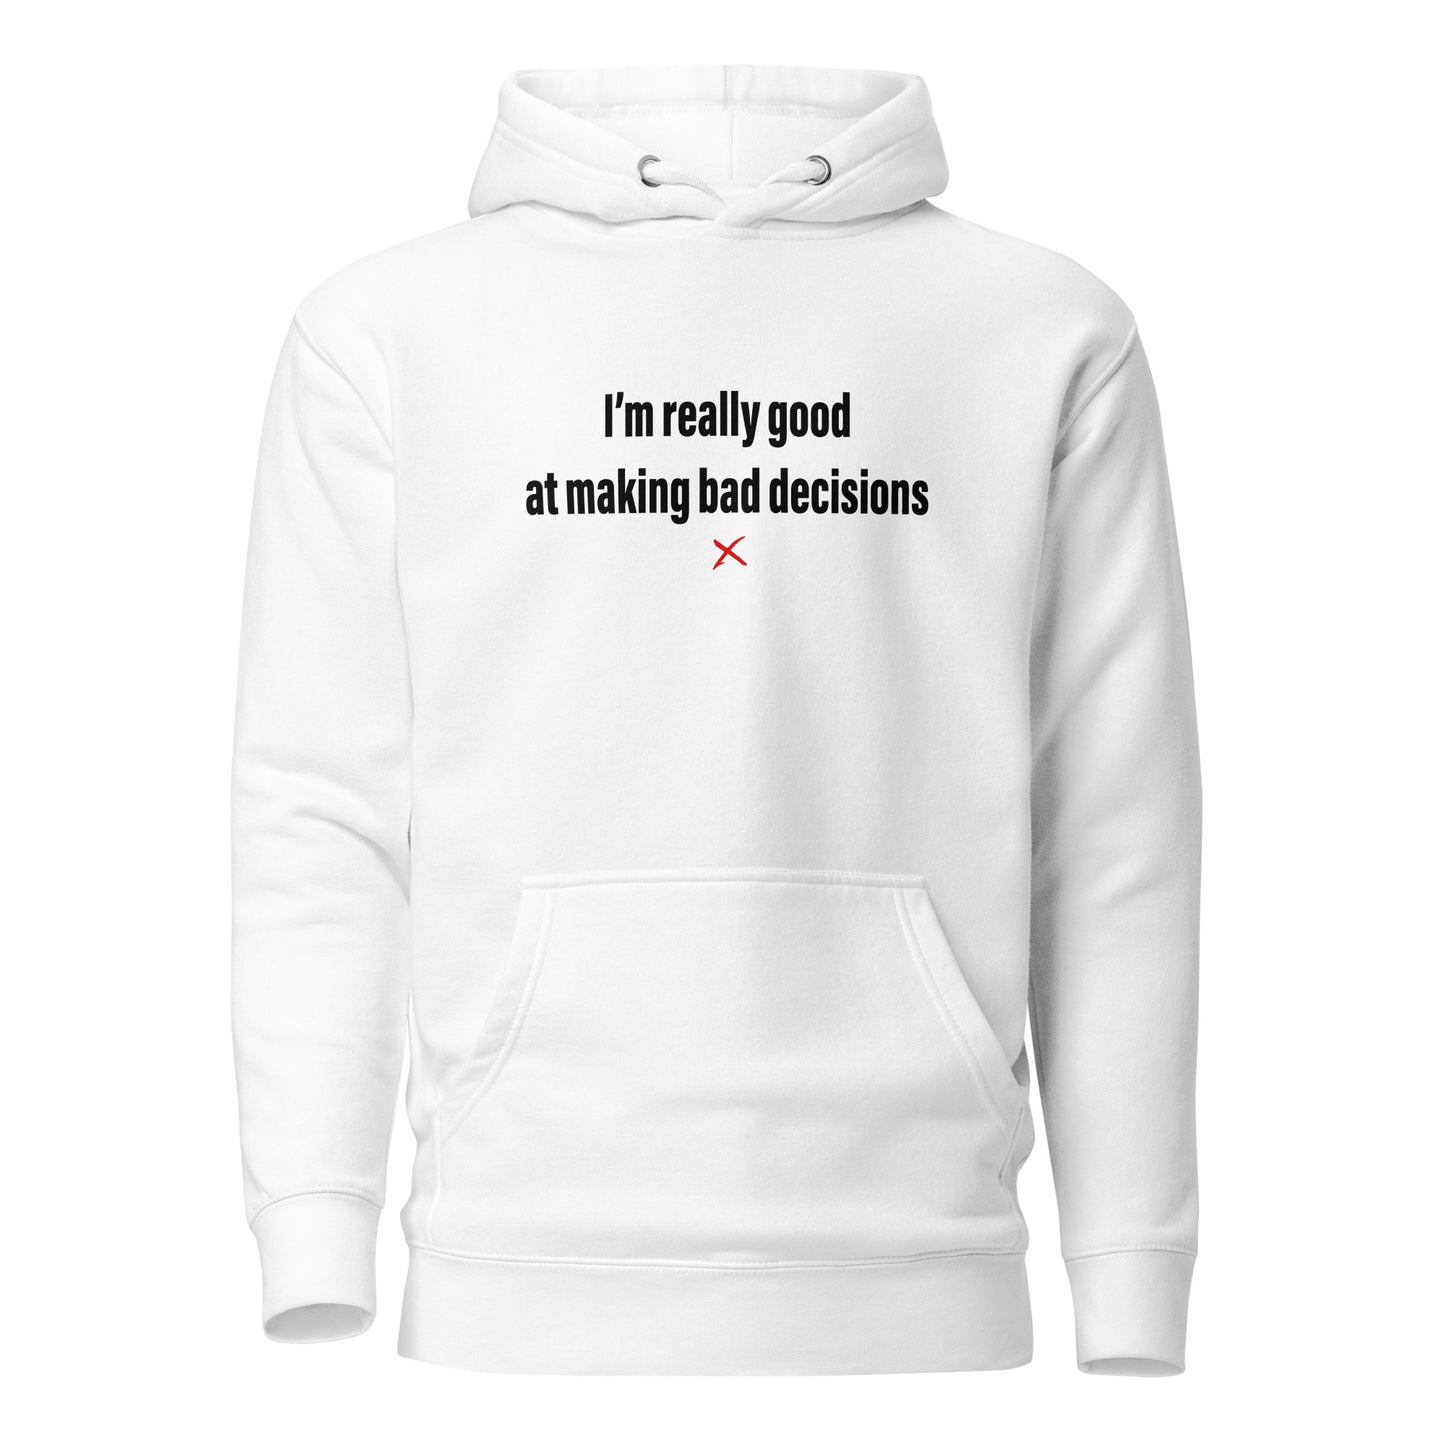 I'm really good at making bad decisions - Hoodie